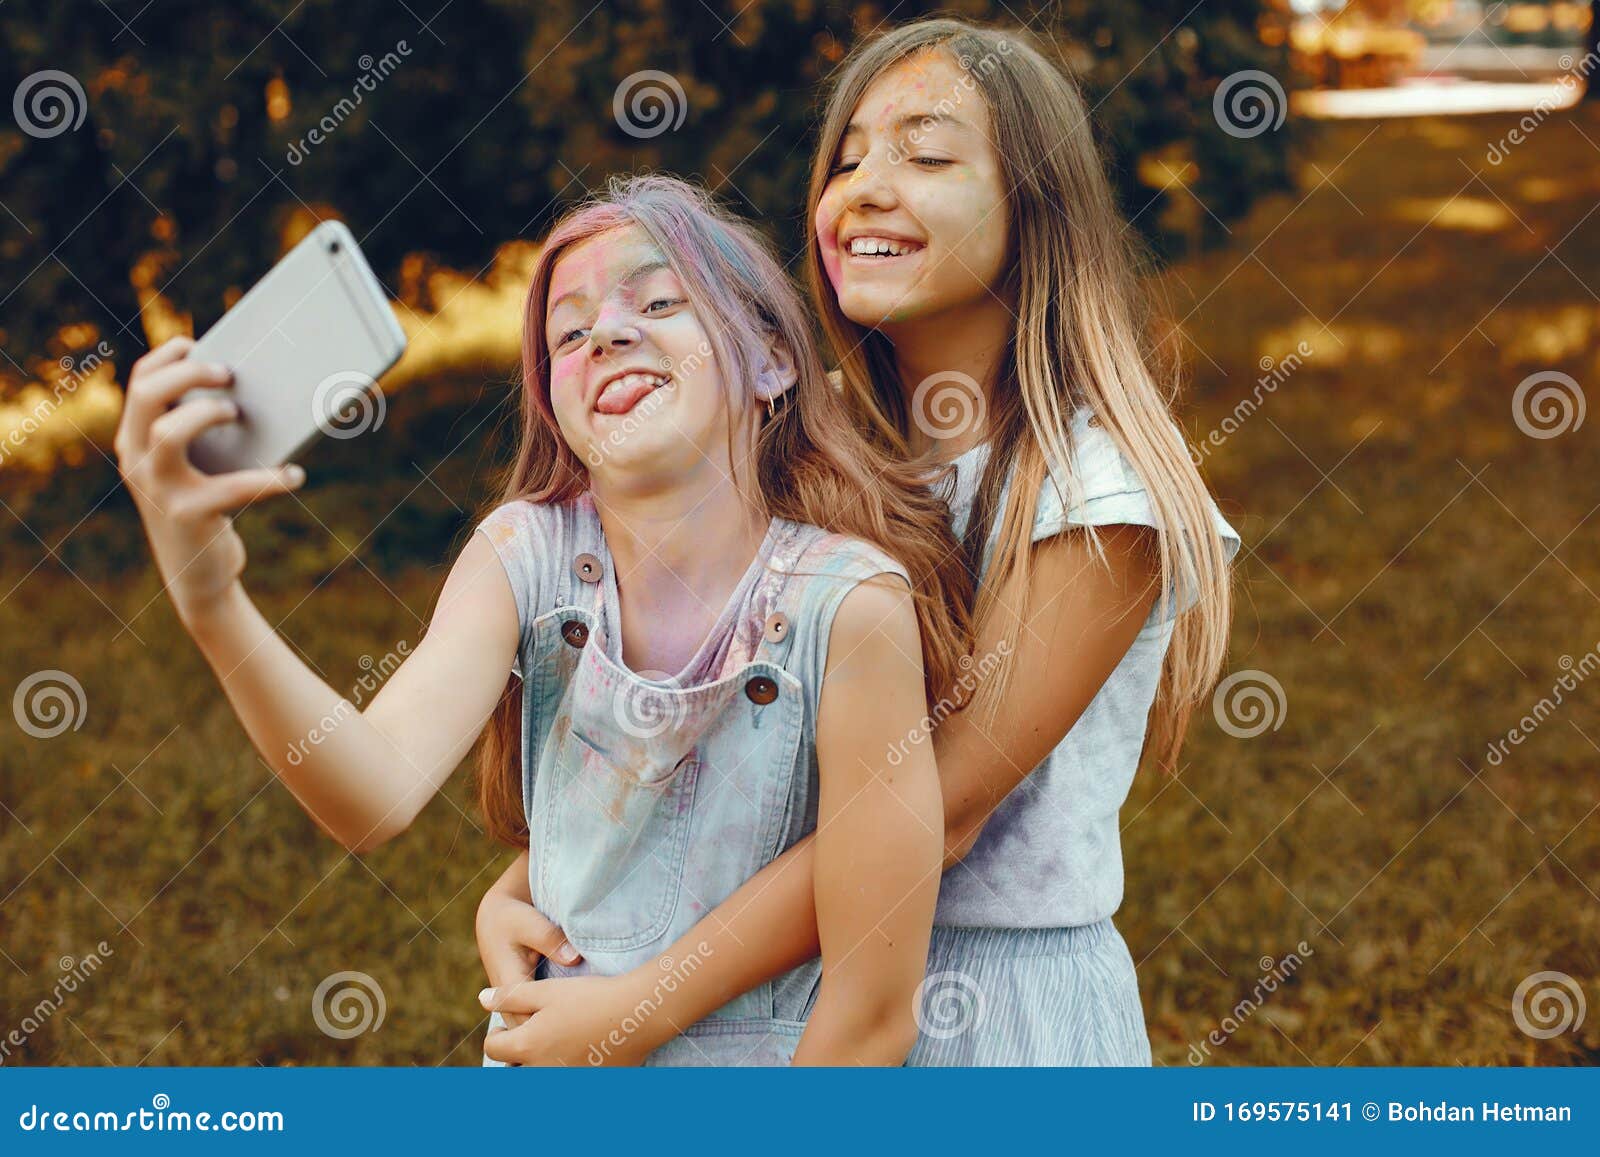 Two Cute Girls Have Fun in a Summer Park Stock Image - Image of girls ...